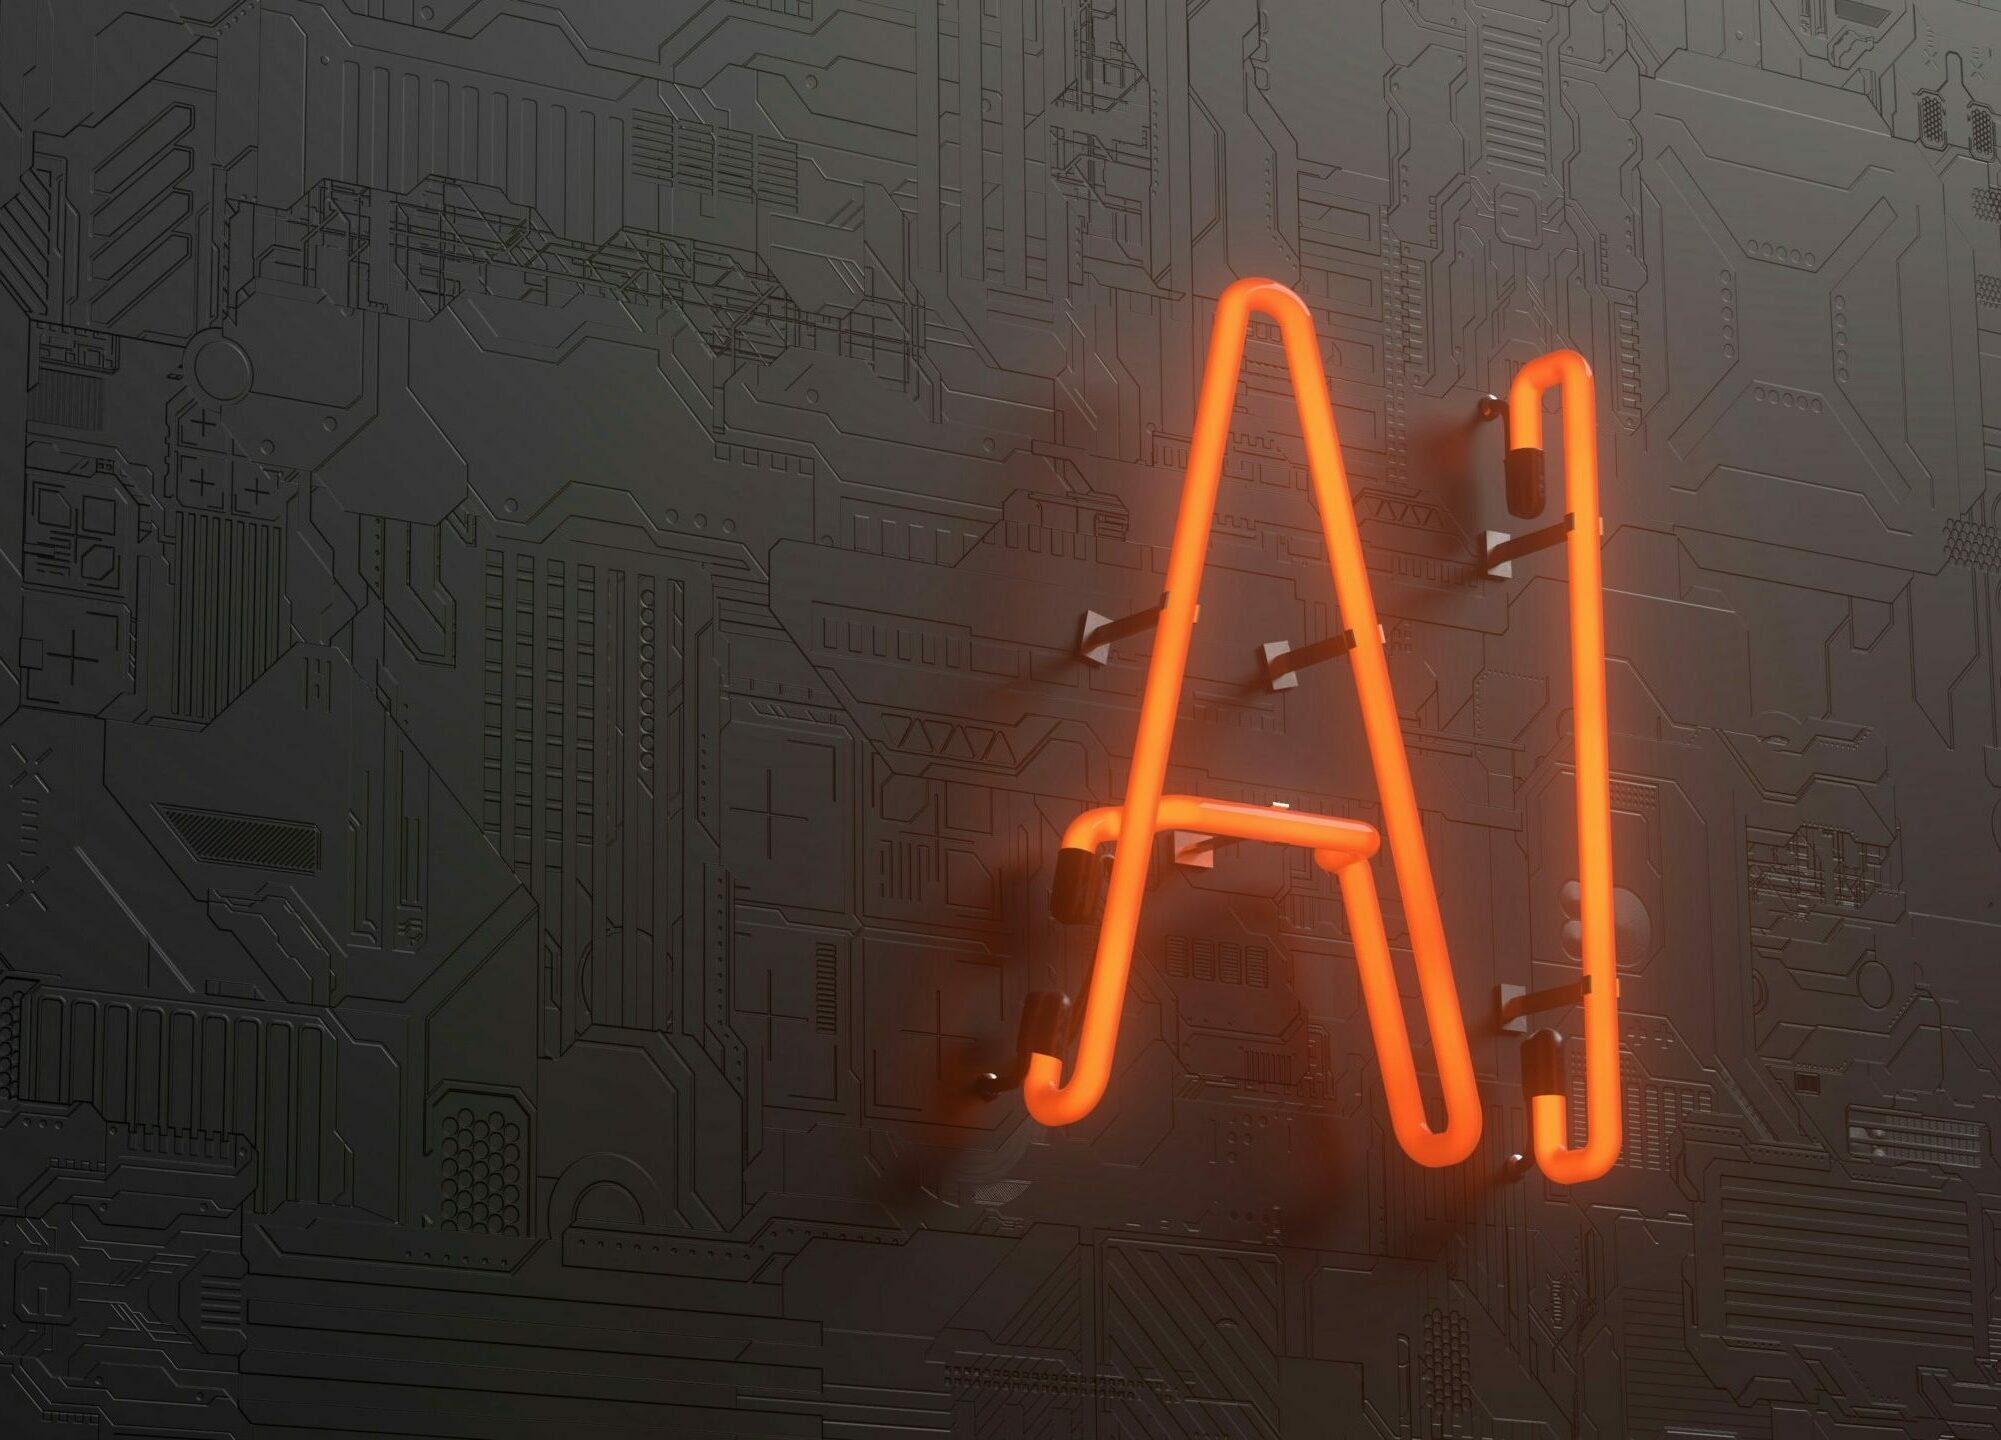 Image of an orange neon AI sign on a dark wall | AI risk